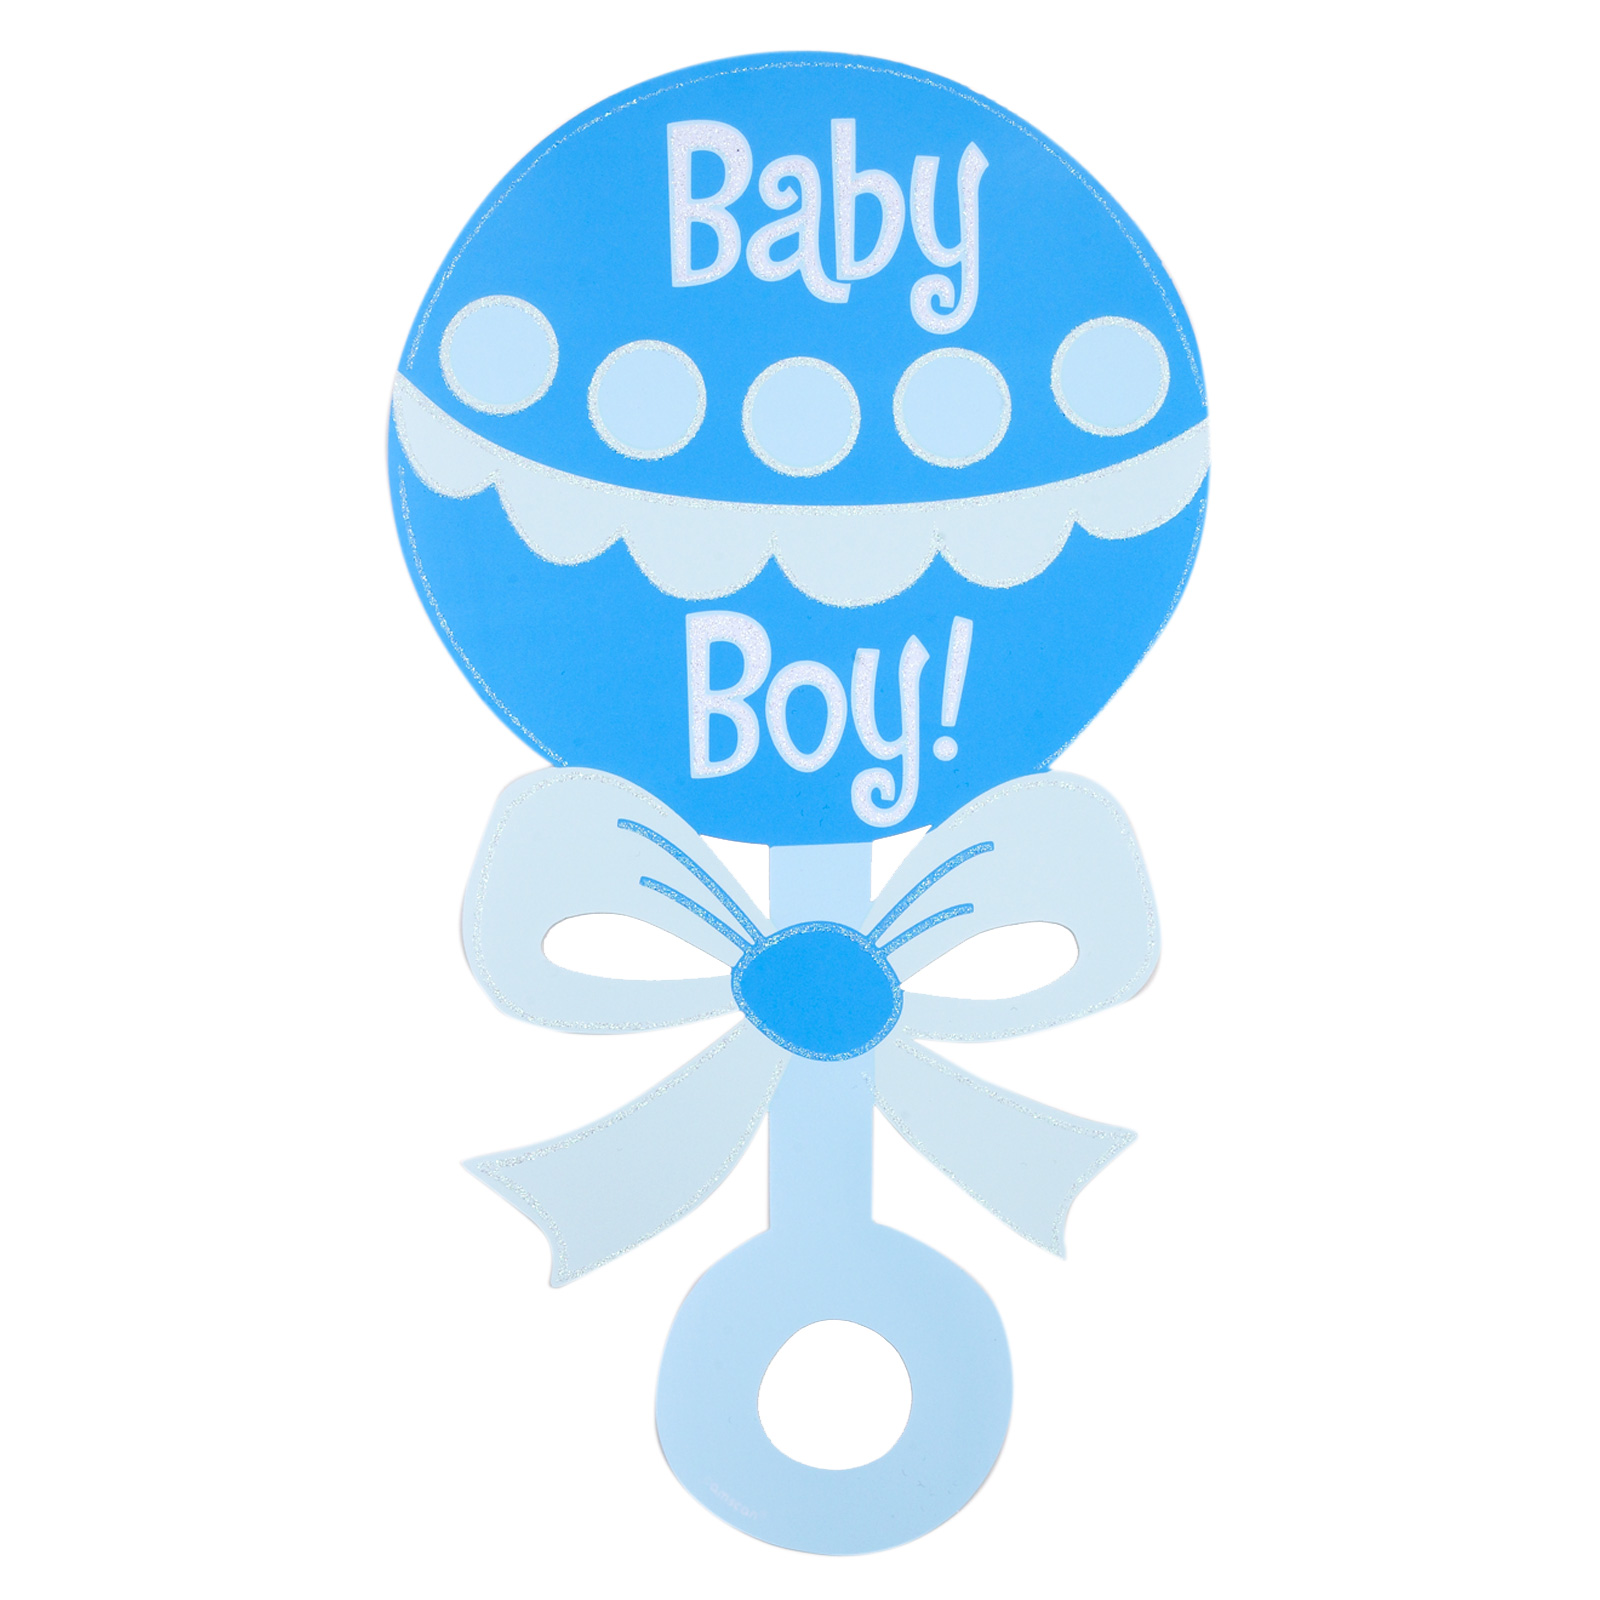 Baby Boy Rattle PNG - 75740